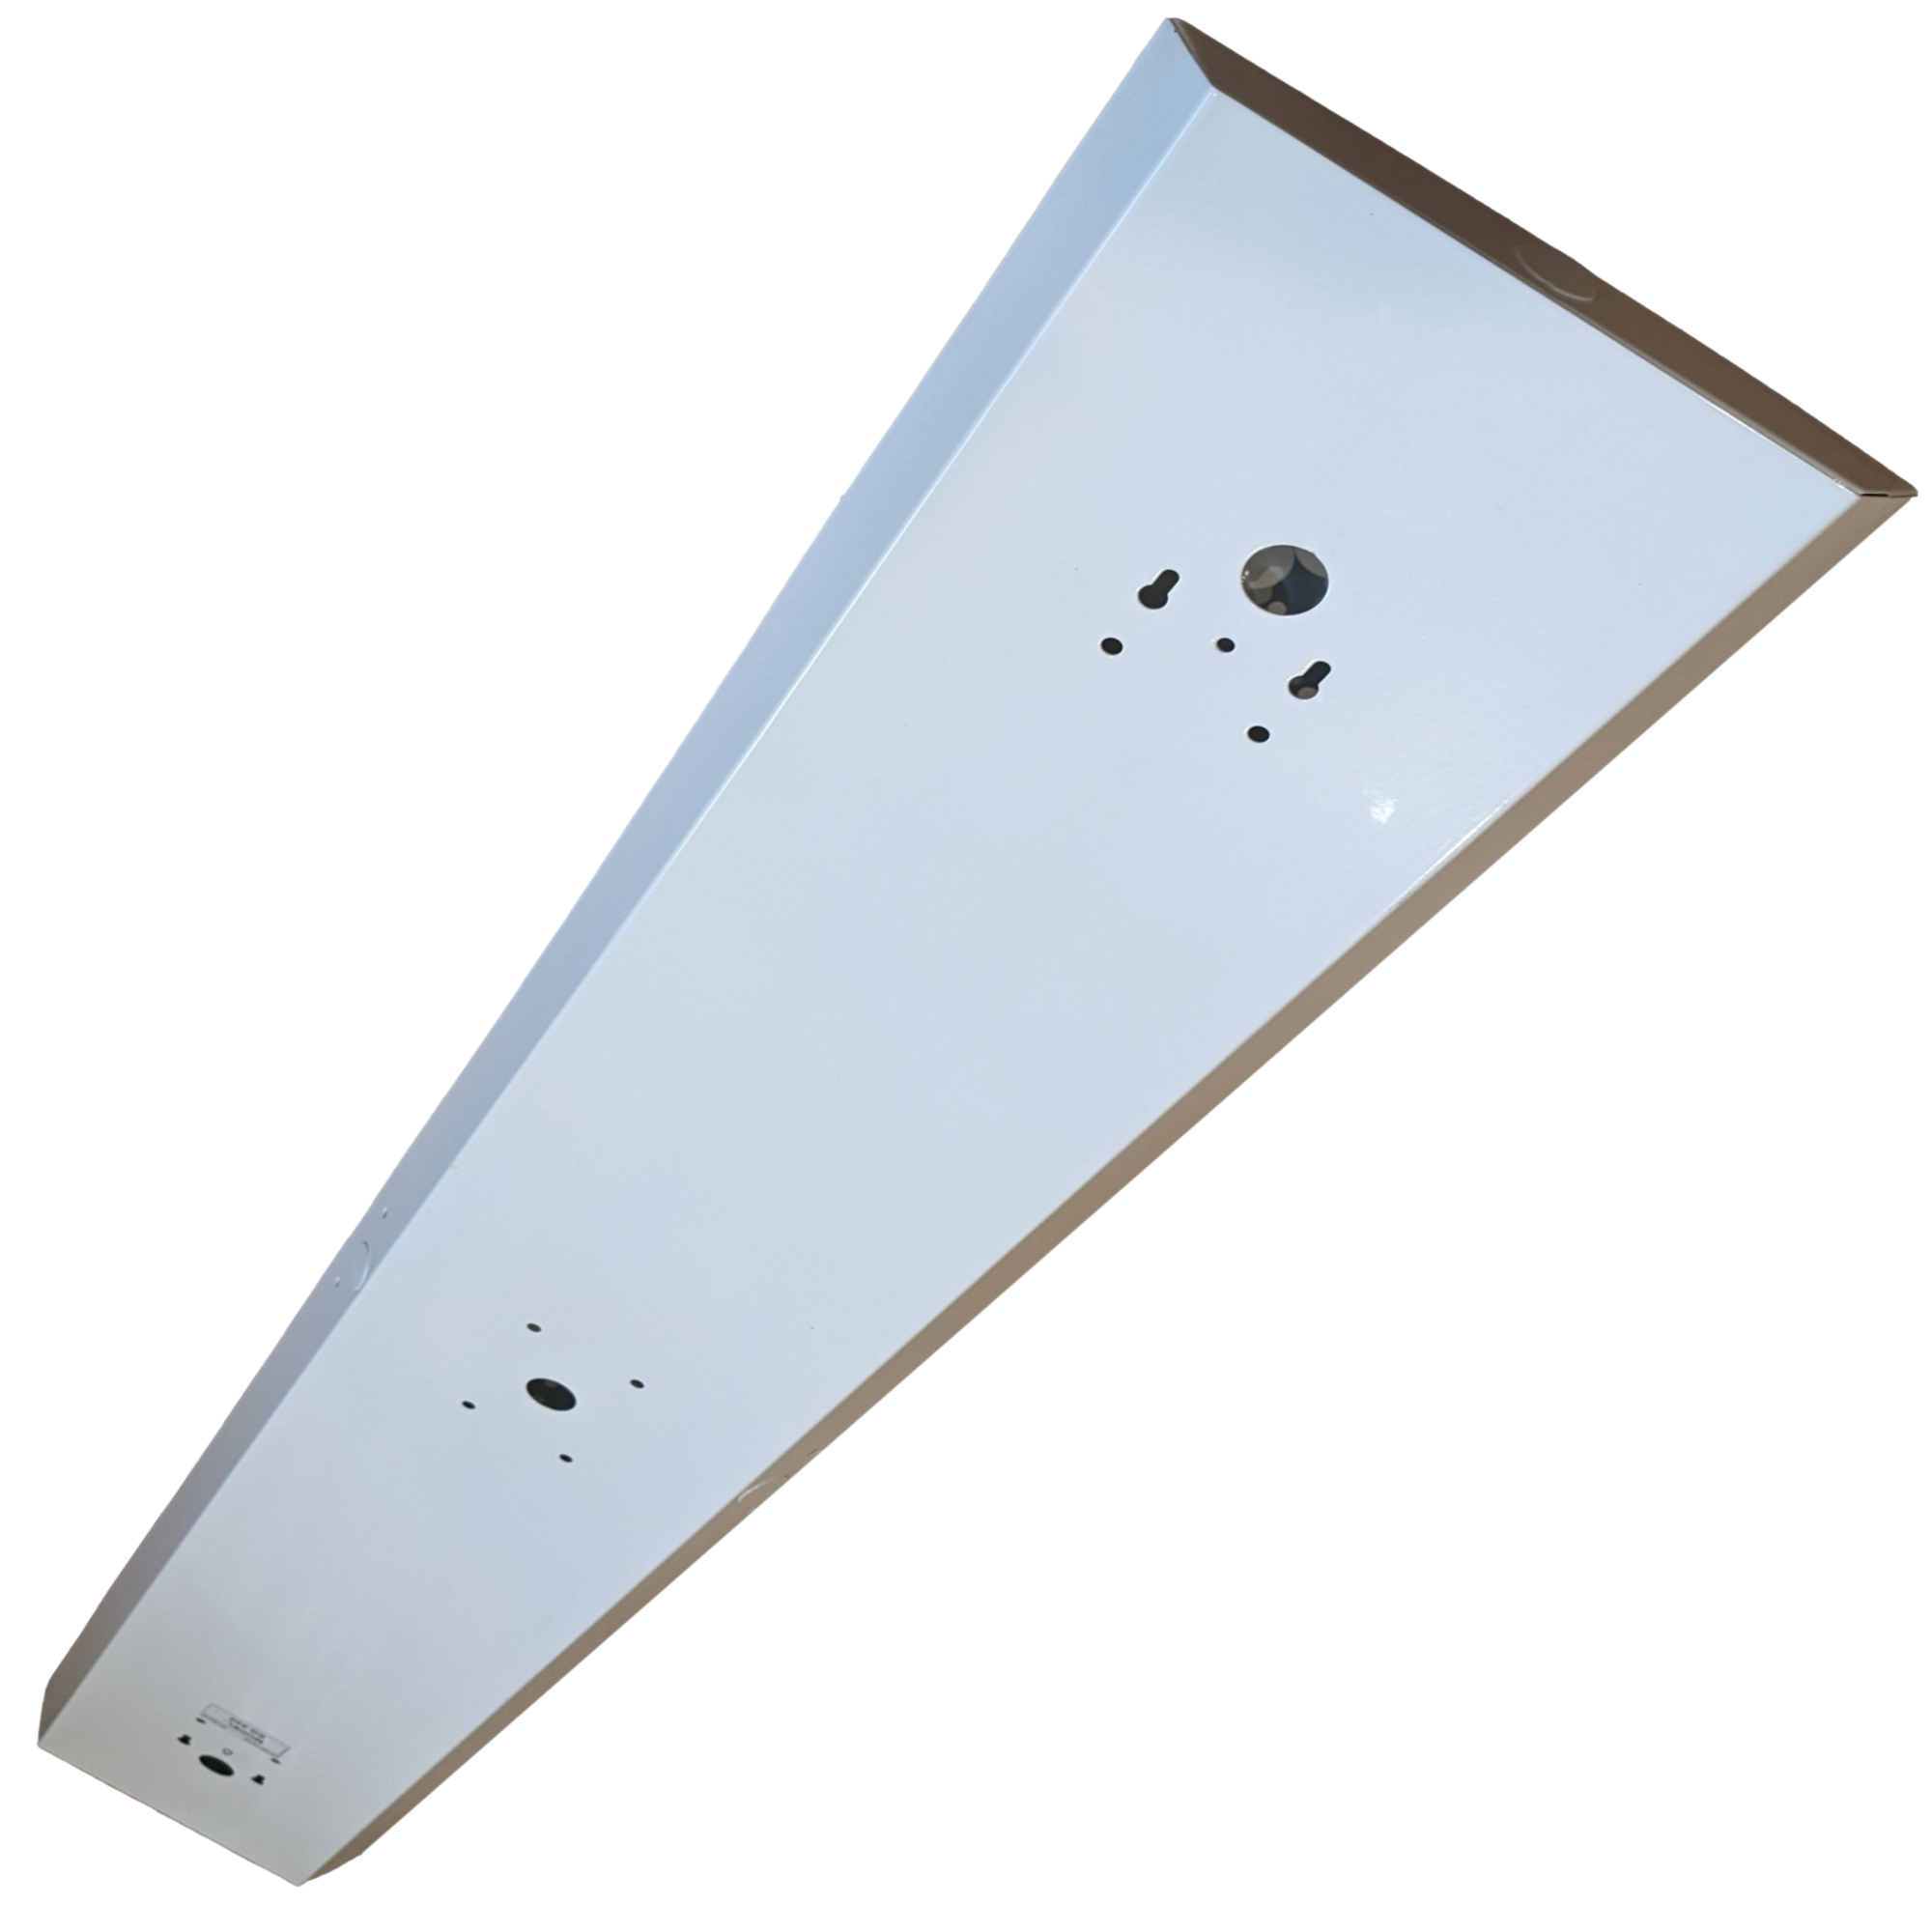 LED 4 Lamp T8 STINGRAY 4XL GEN 2.0: Brighter, Most Efficient, Sleeker - Frosted LEDs